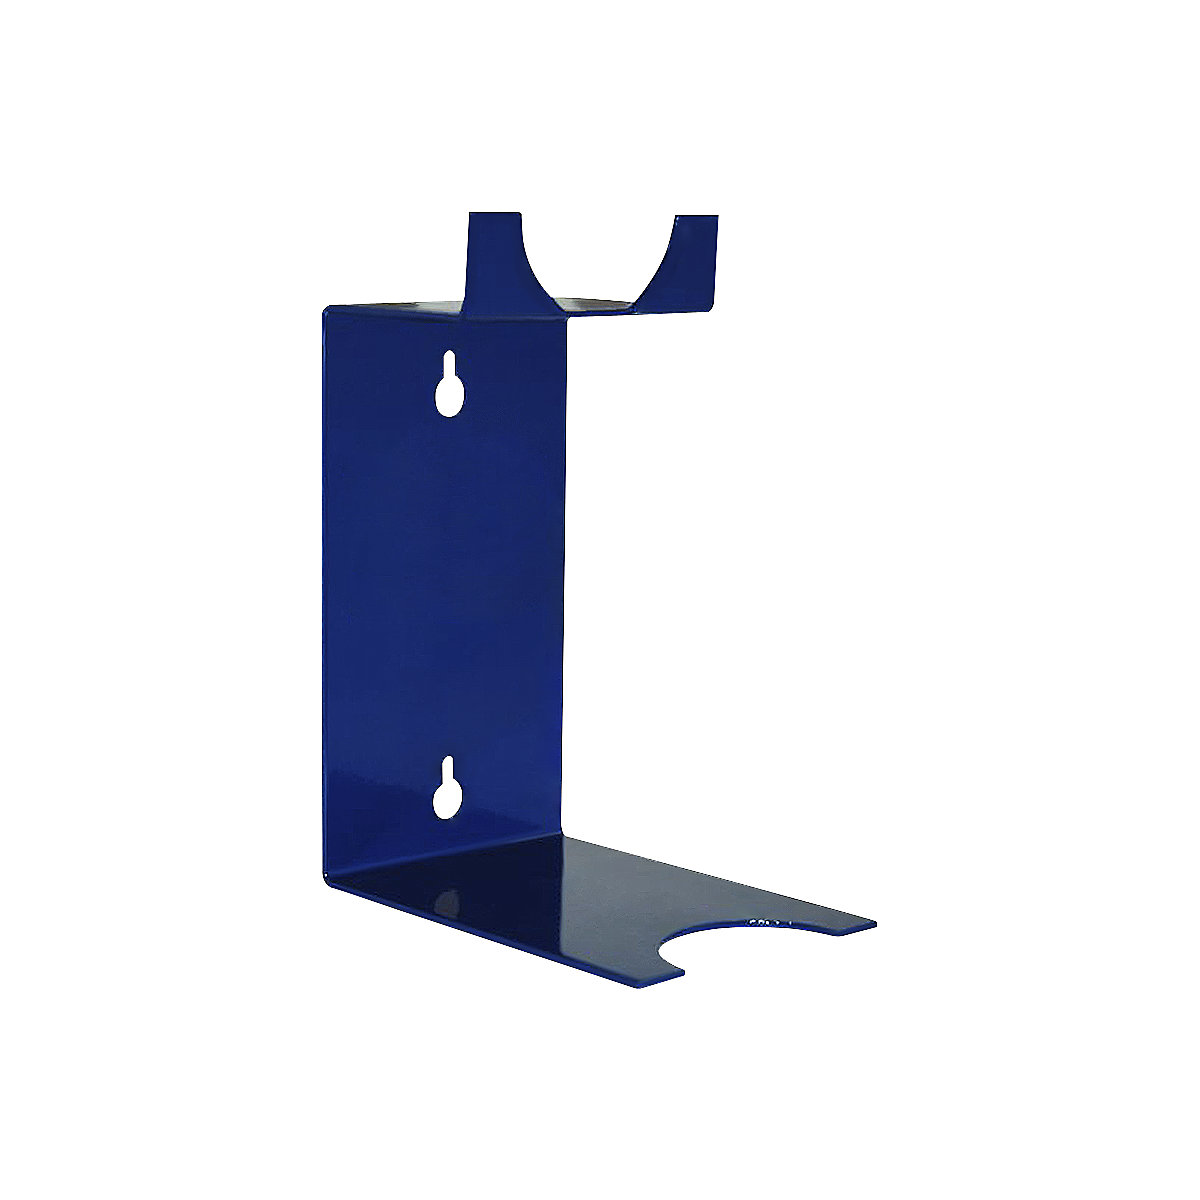 Wall suspension device - Jessberger